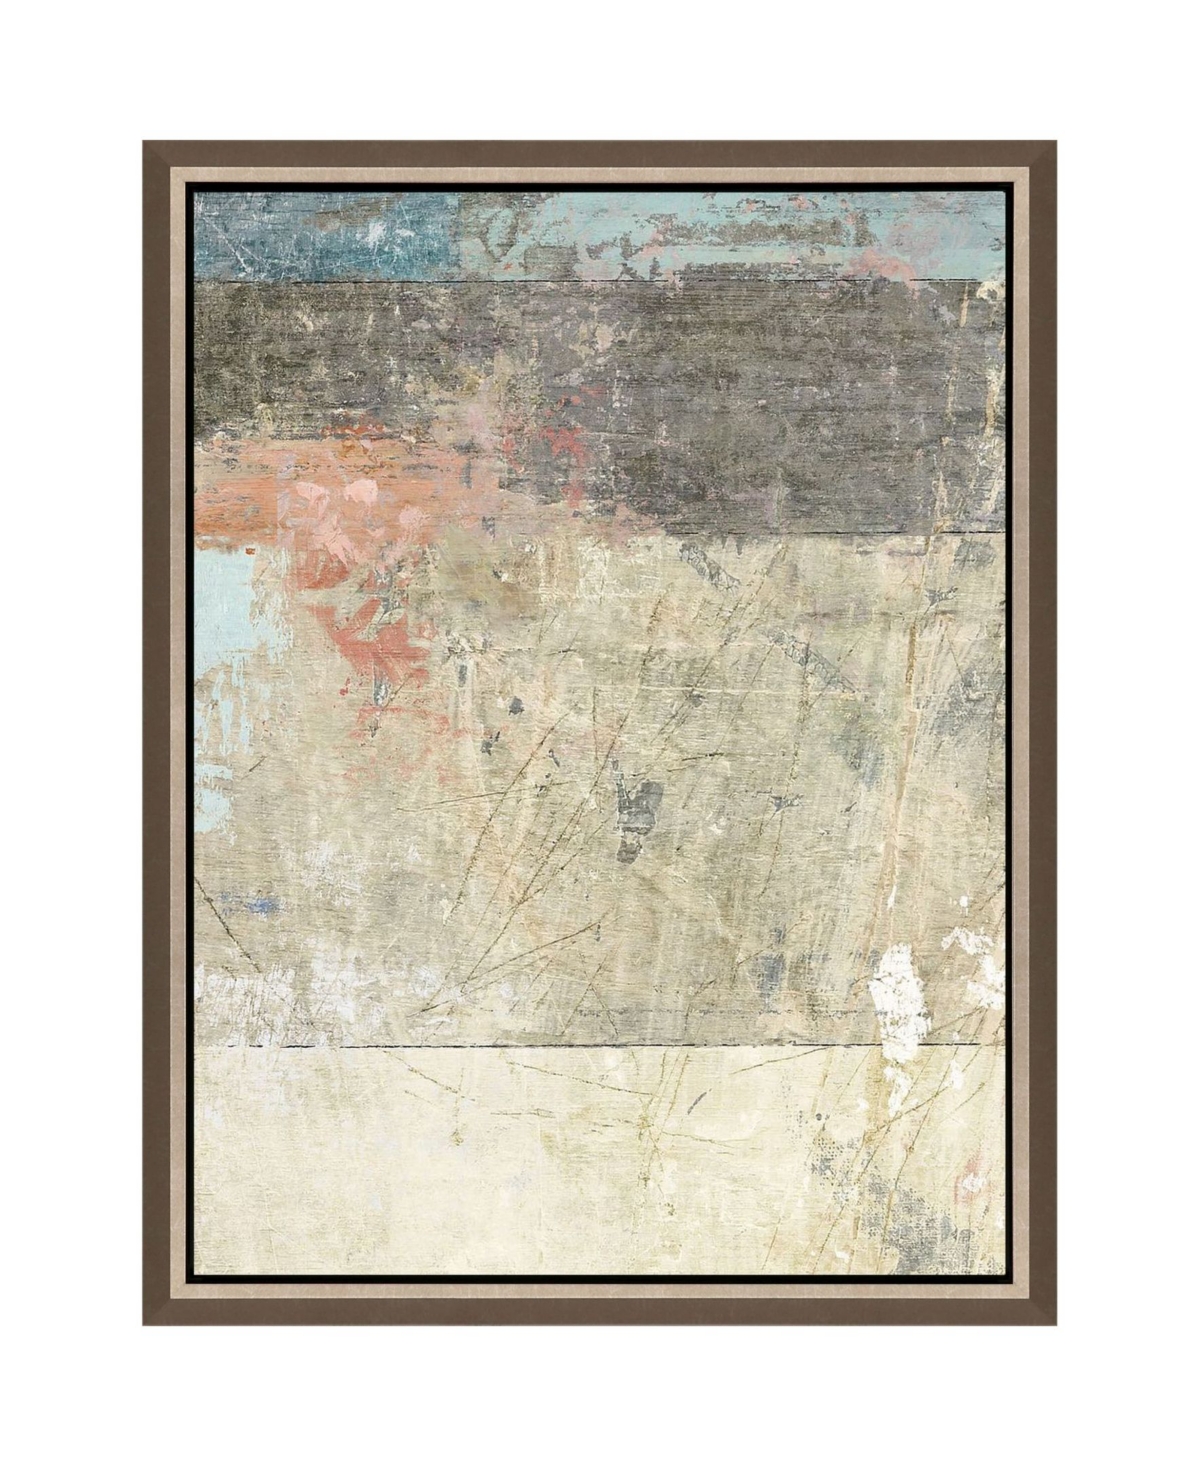 Paragon Picture Gallery Urban Decay No.1 Framed Art In Beige